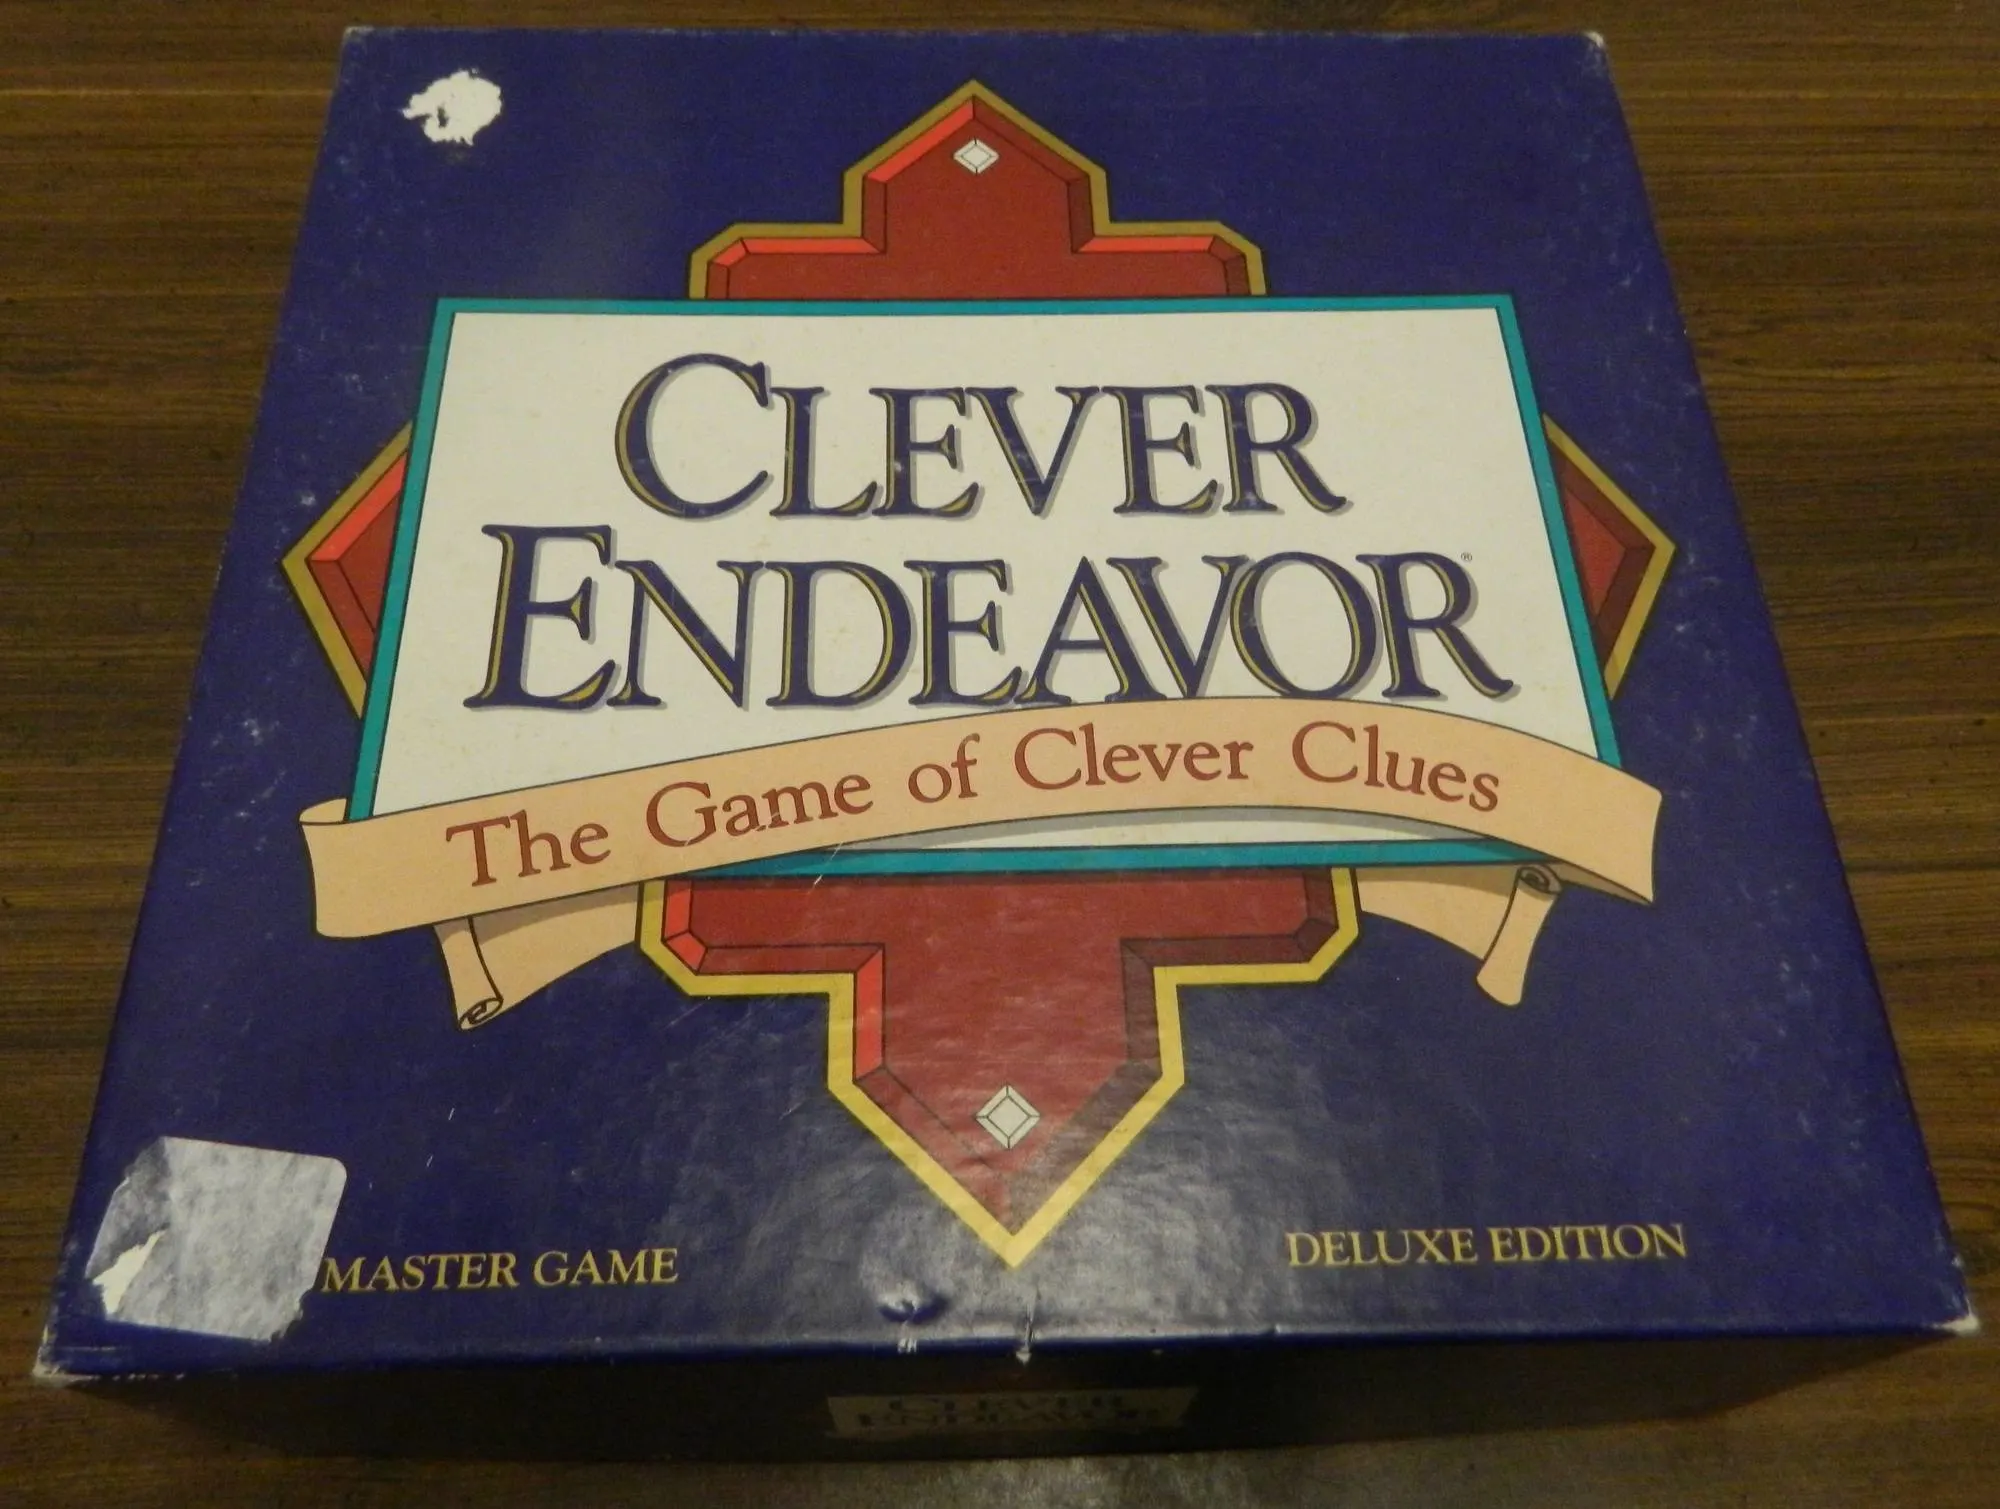 Box for Clever Endeavor